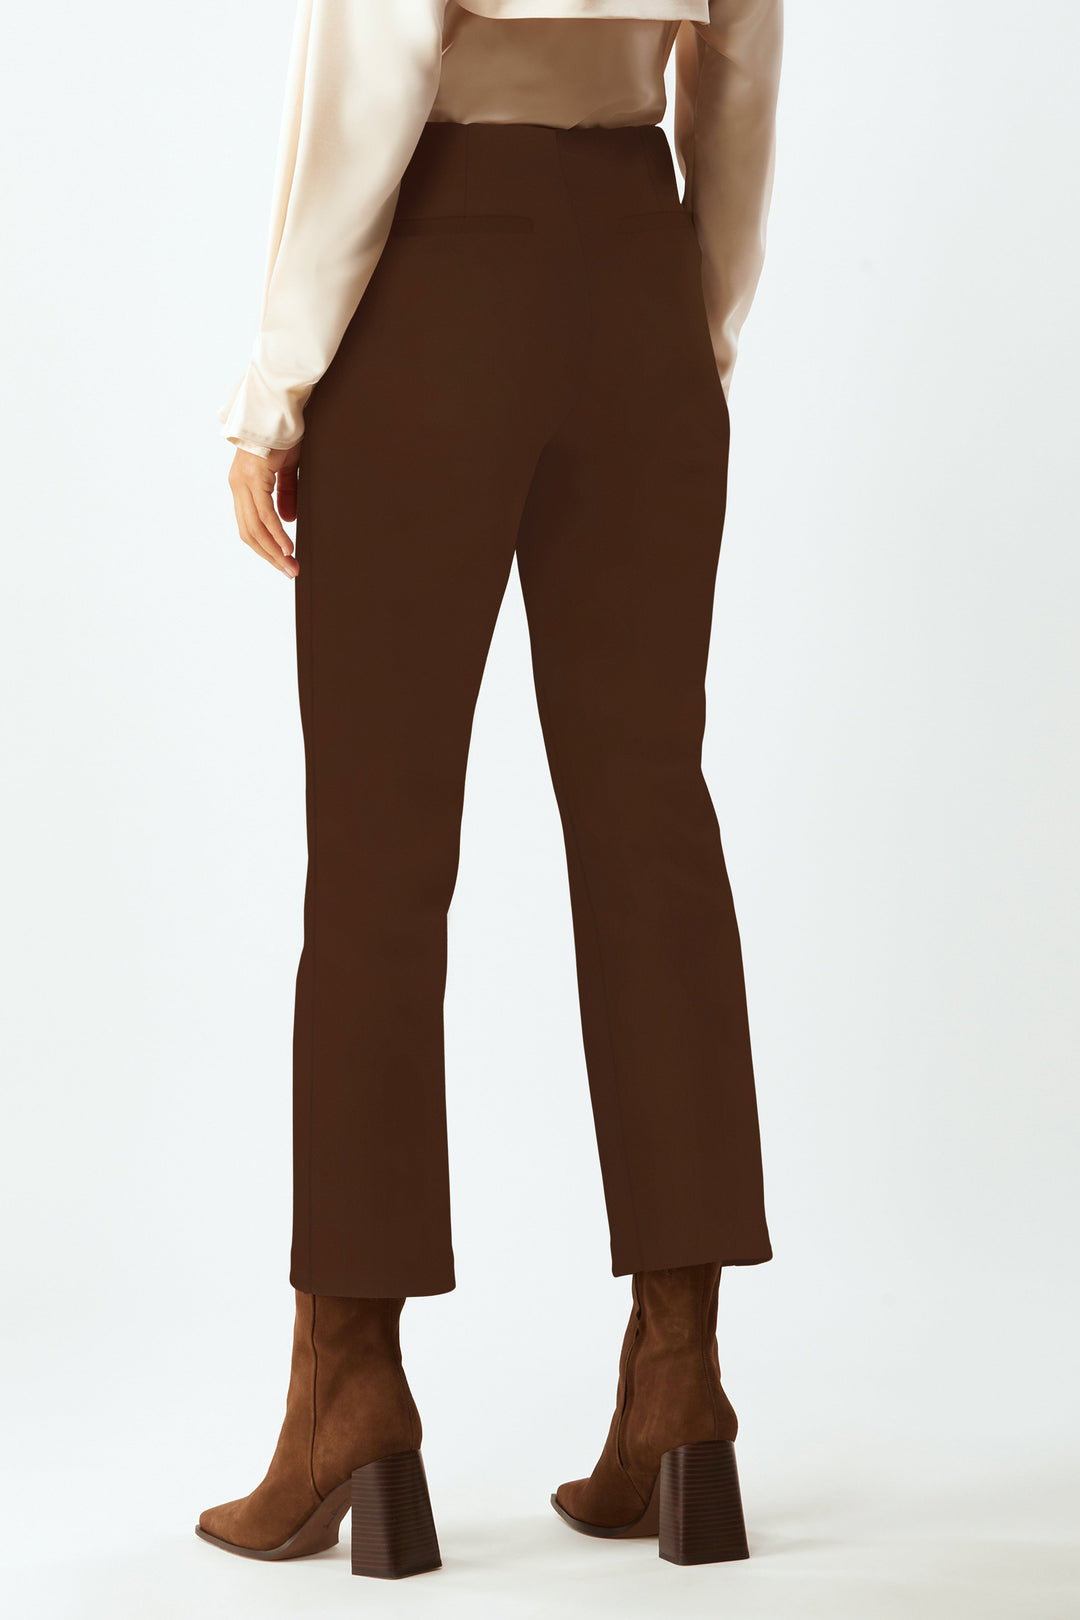 Prince Cropped Flare Pant - Chocolate